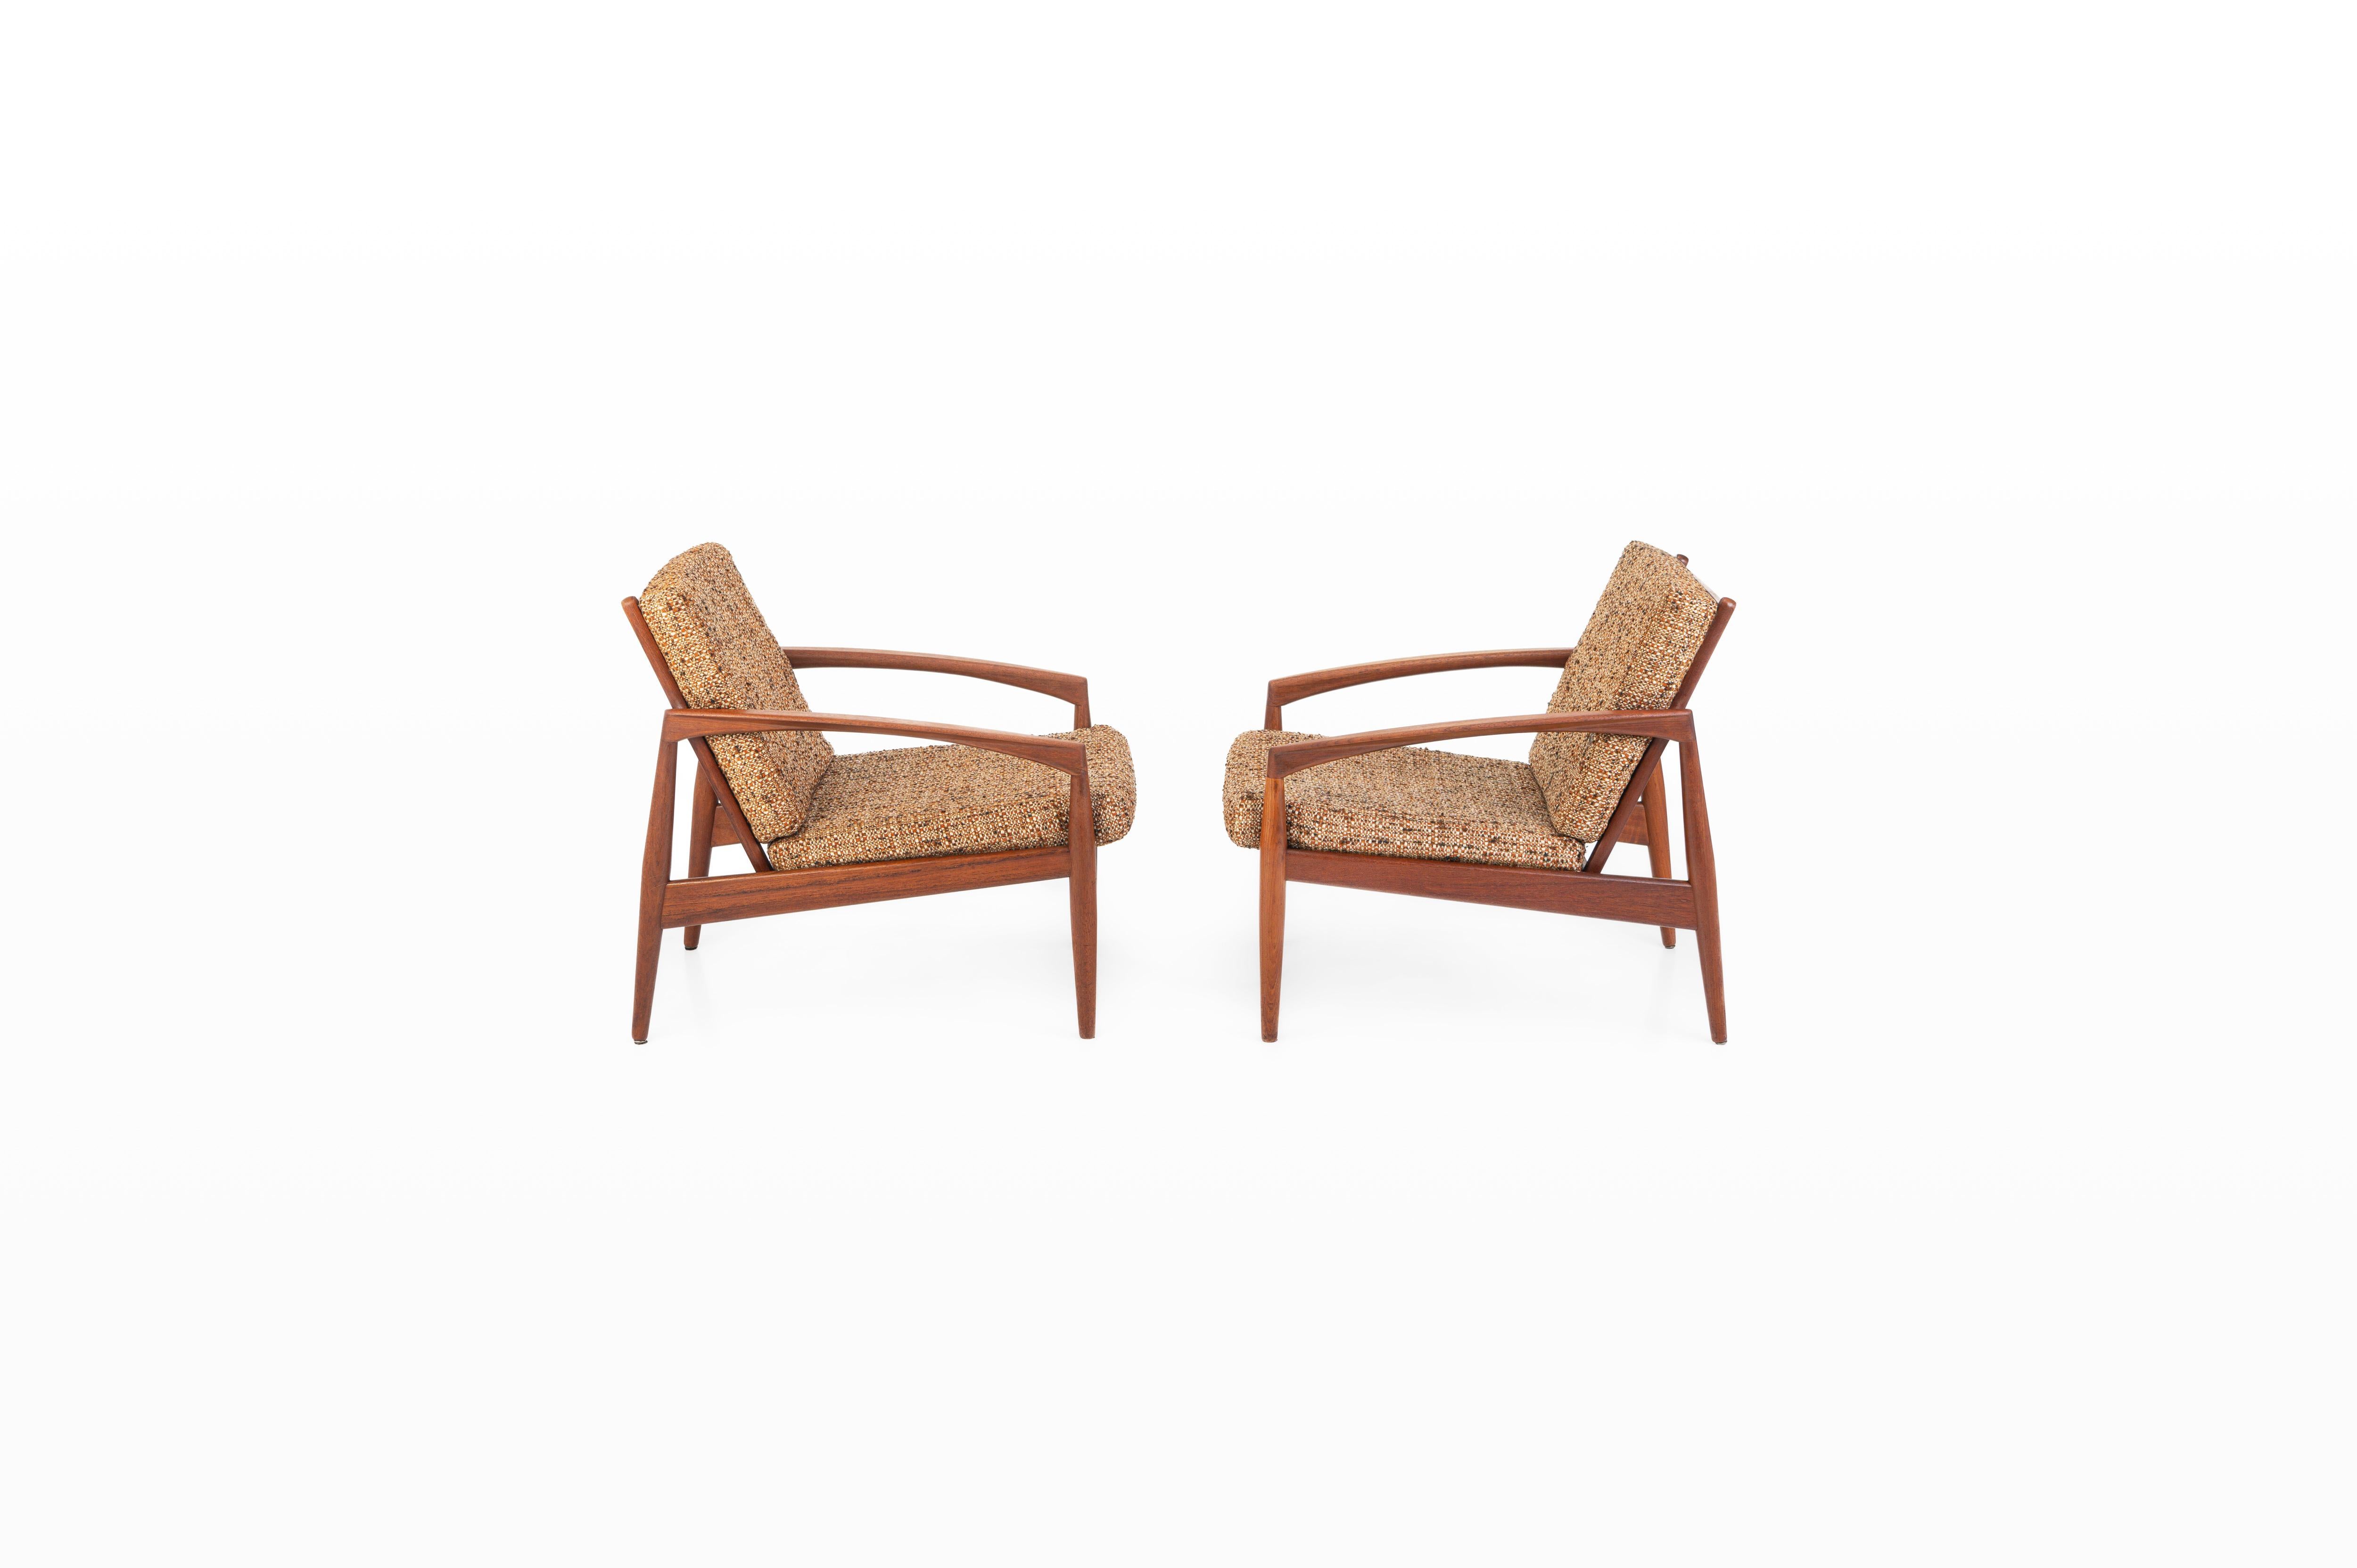 Set of two vintage Paper Knife chairs designed by Kai Kristiansen for Magnus Olesen in Denmark. These easy chairs are designed in 1955. They have a teak frame and a mixed fabric with warm shades of brown, beige and orange.

Dimensions:
W: 64 cm
D: